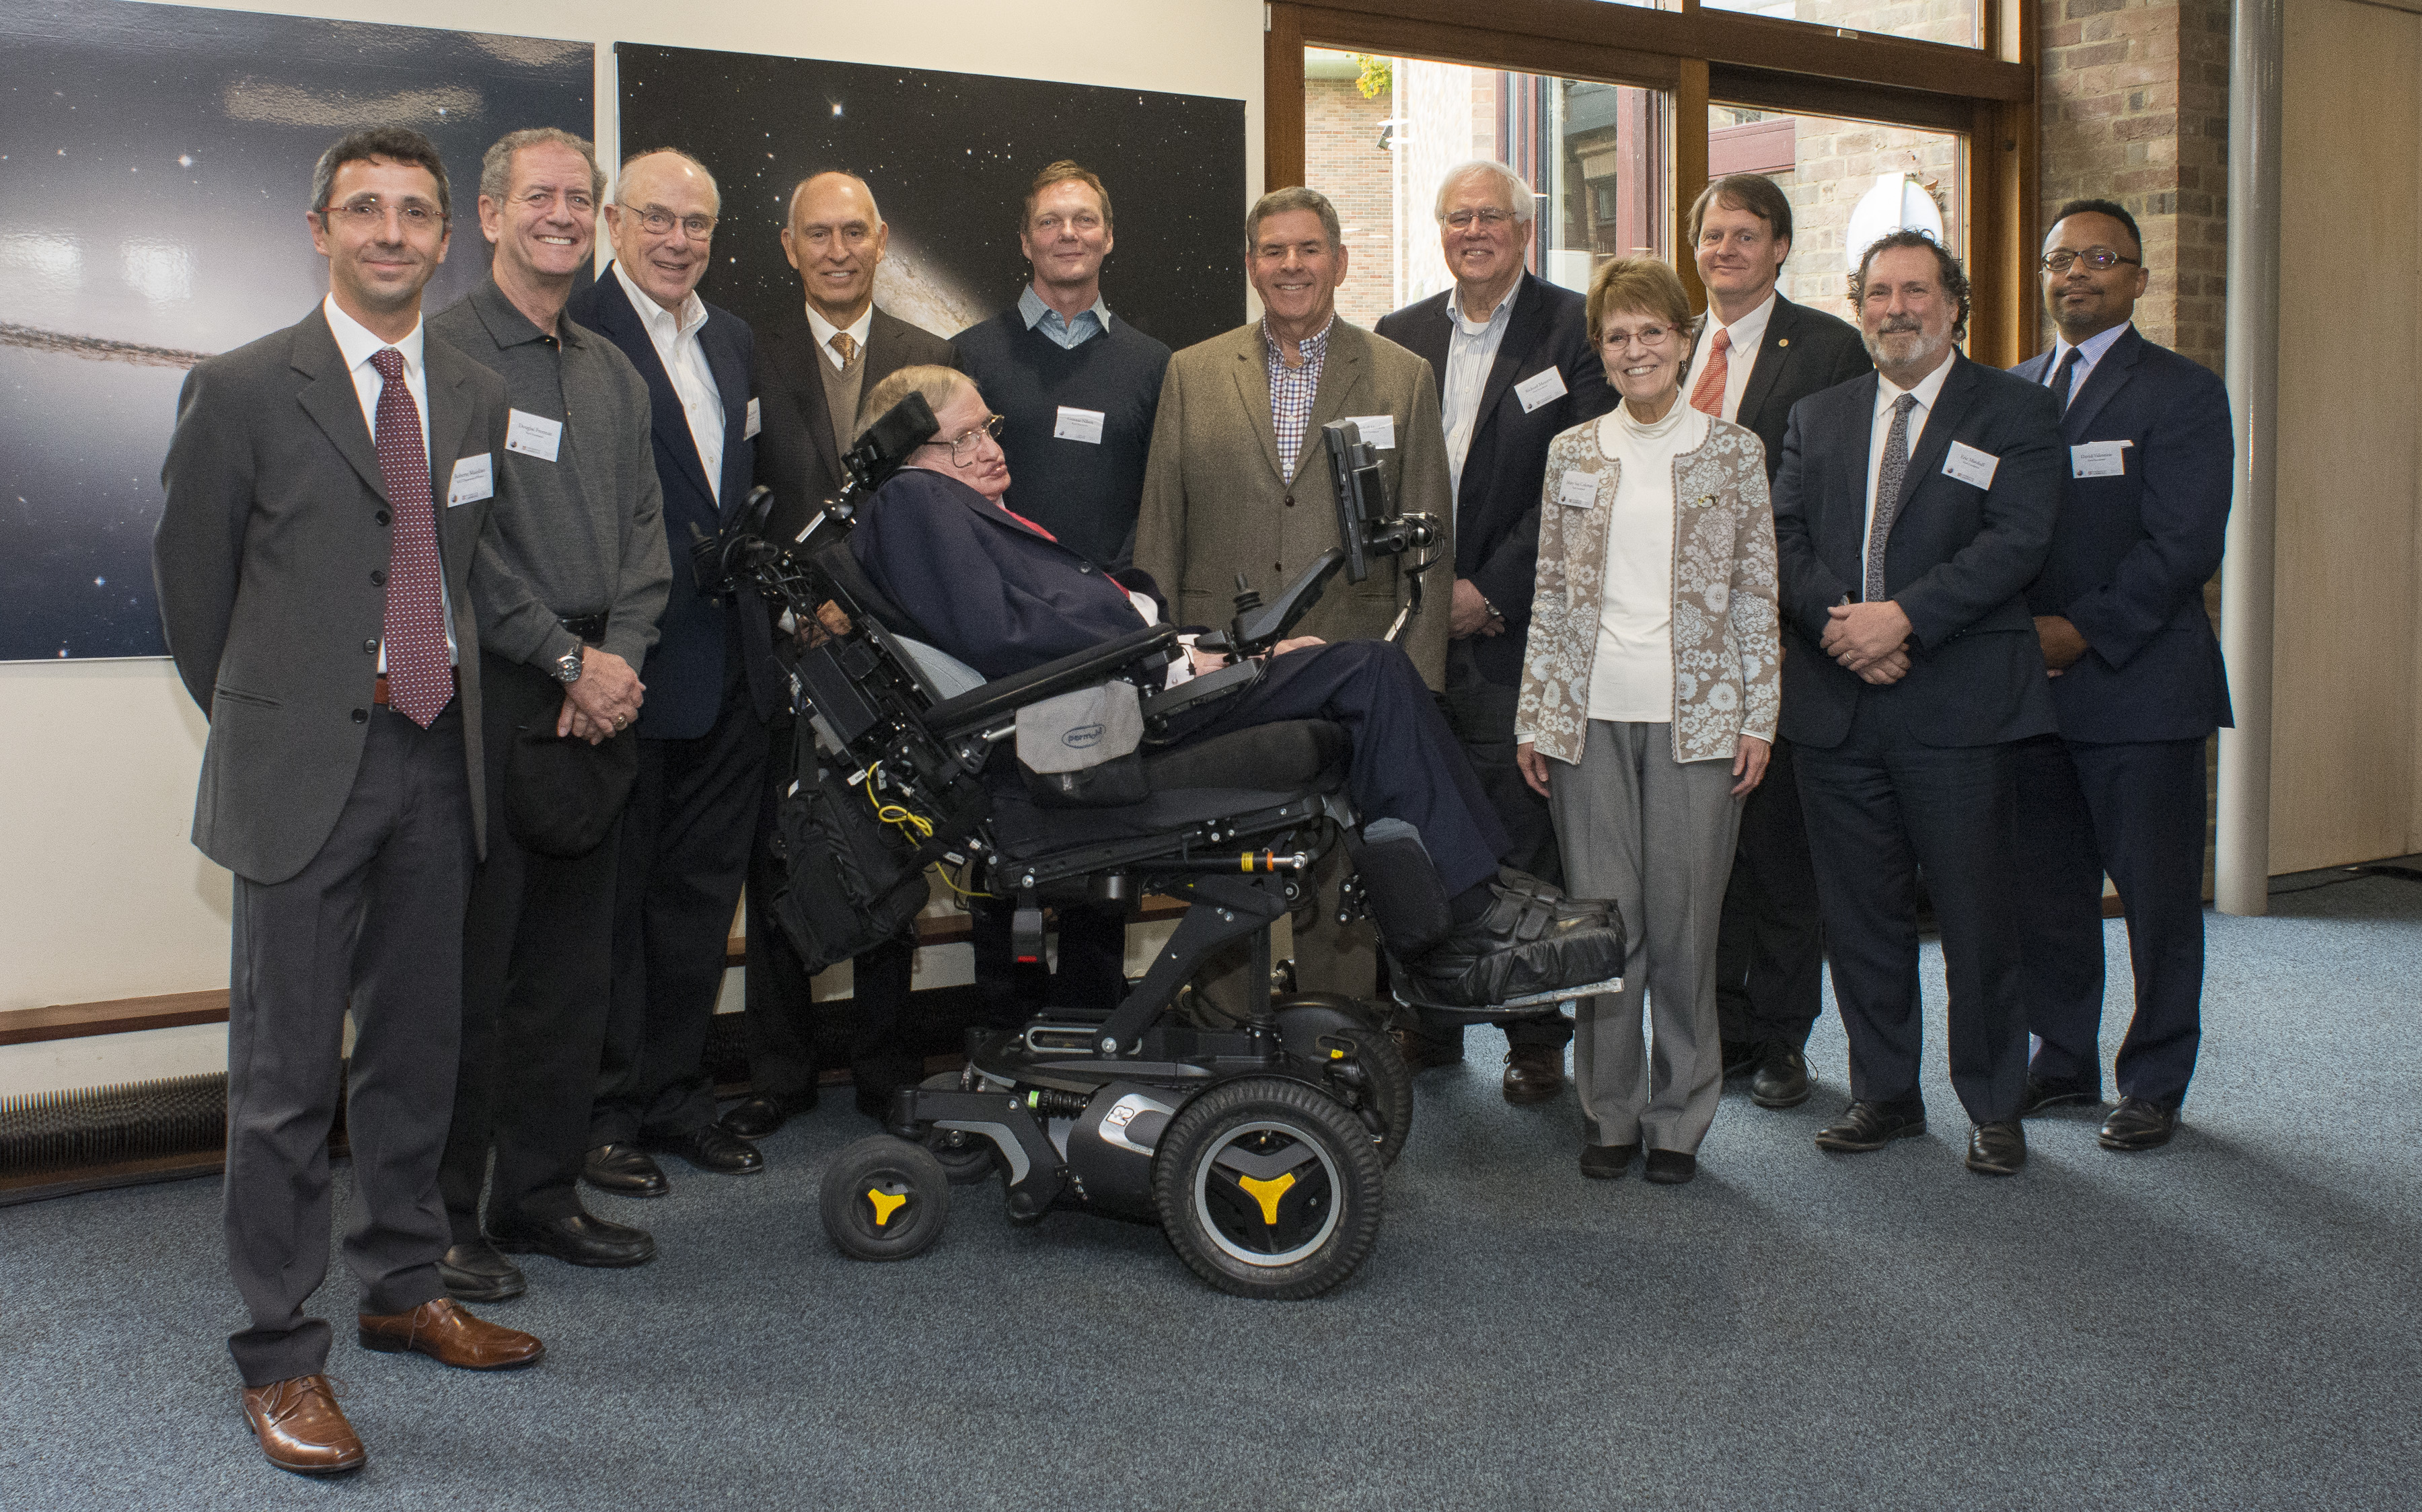 The Kavli Foundation Board of Directors and Staff with Stephen Hawking and Roberto Maiolino